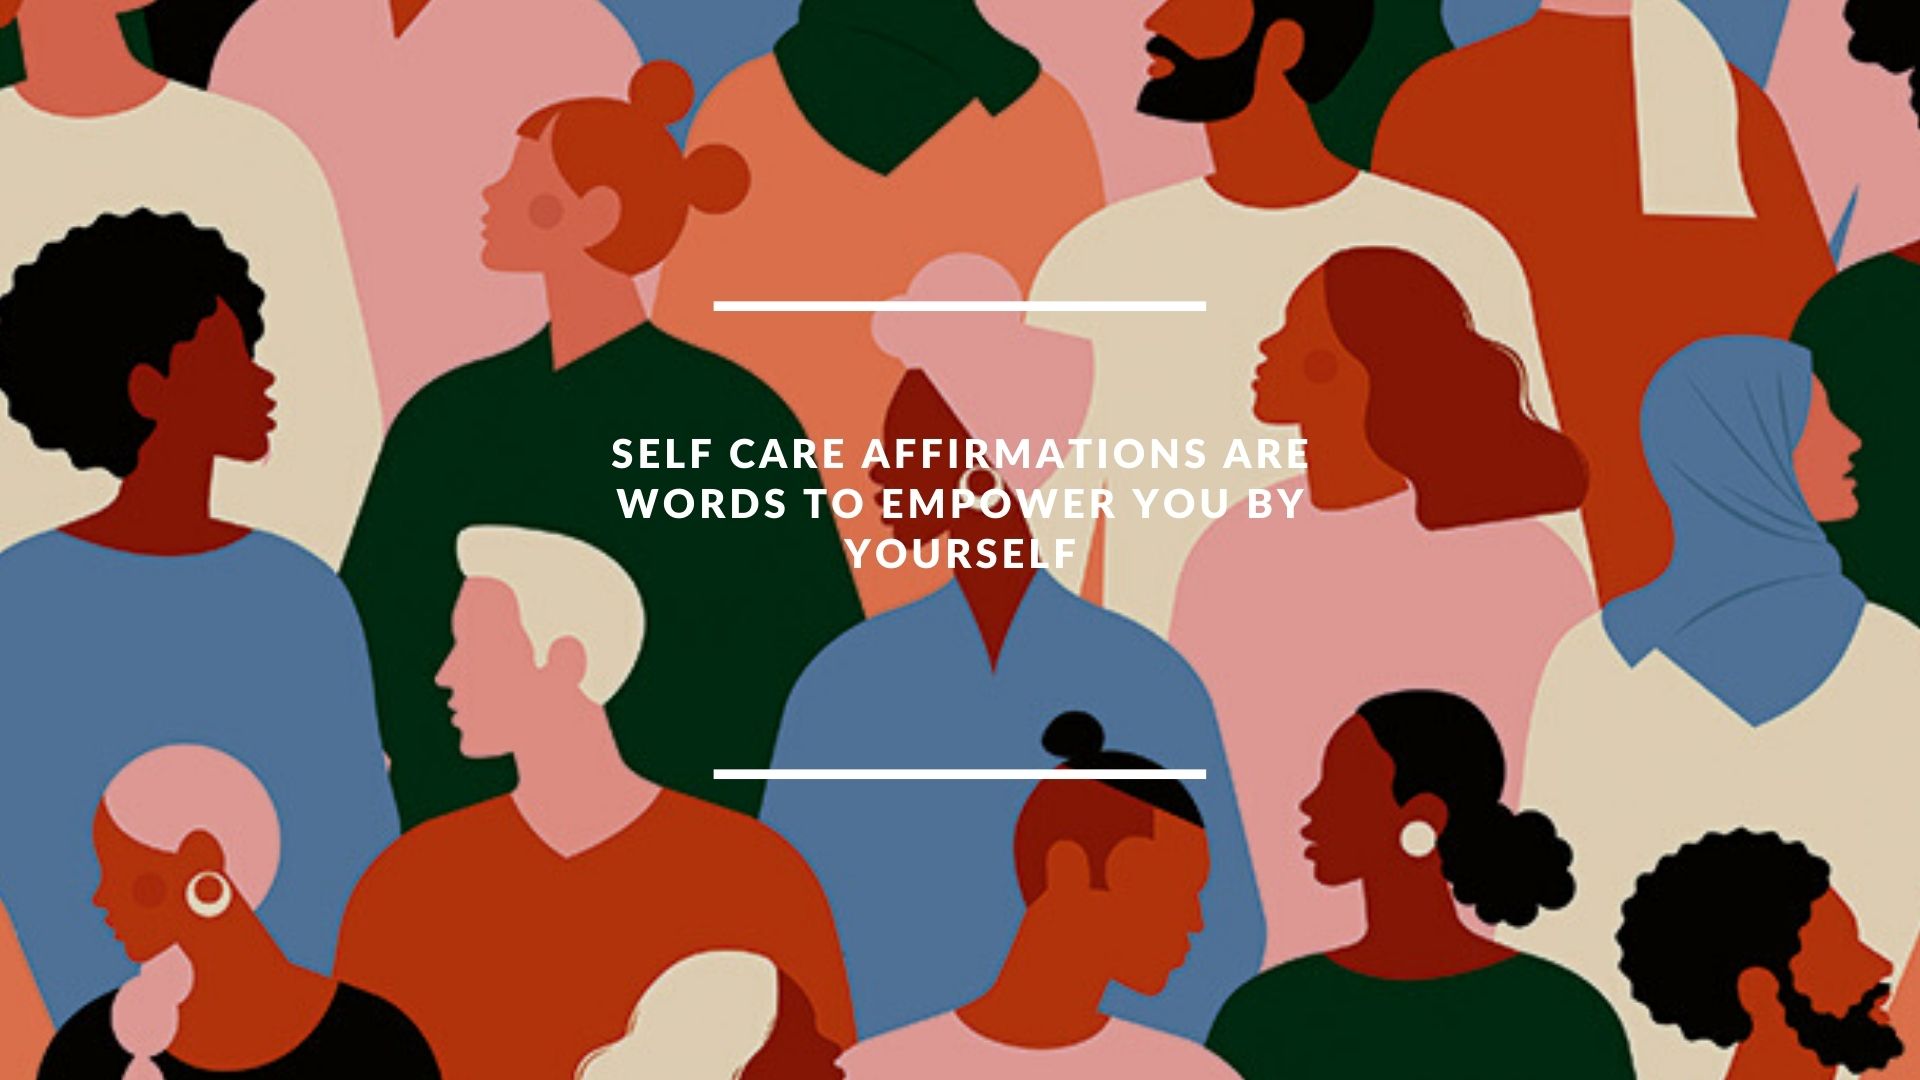 Self Care Affirmations are words to empower you by yourself